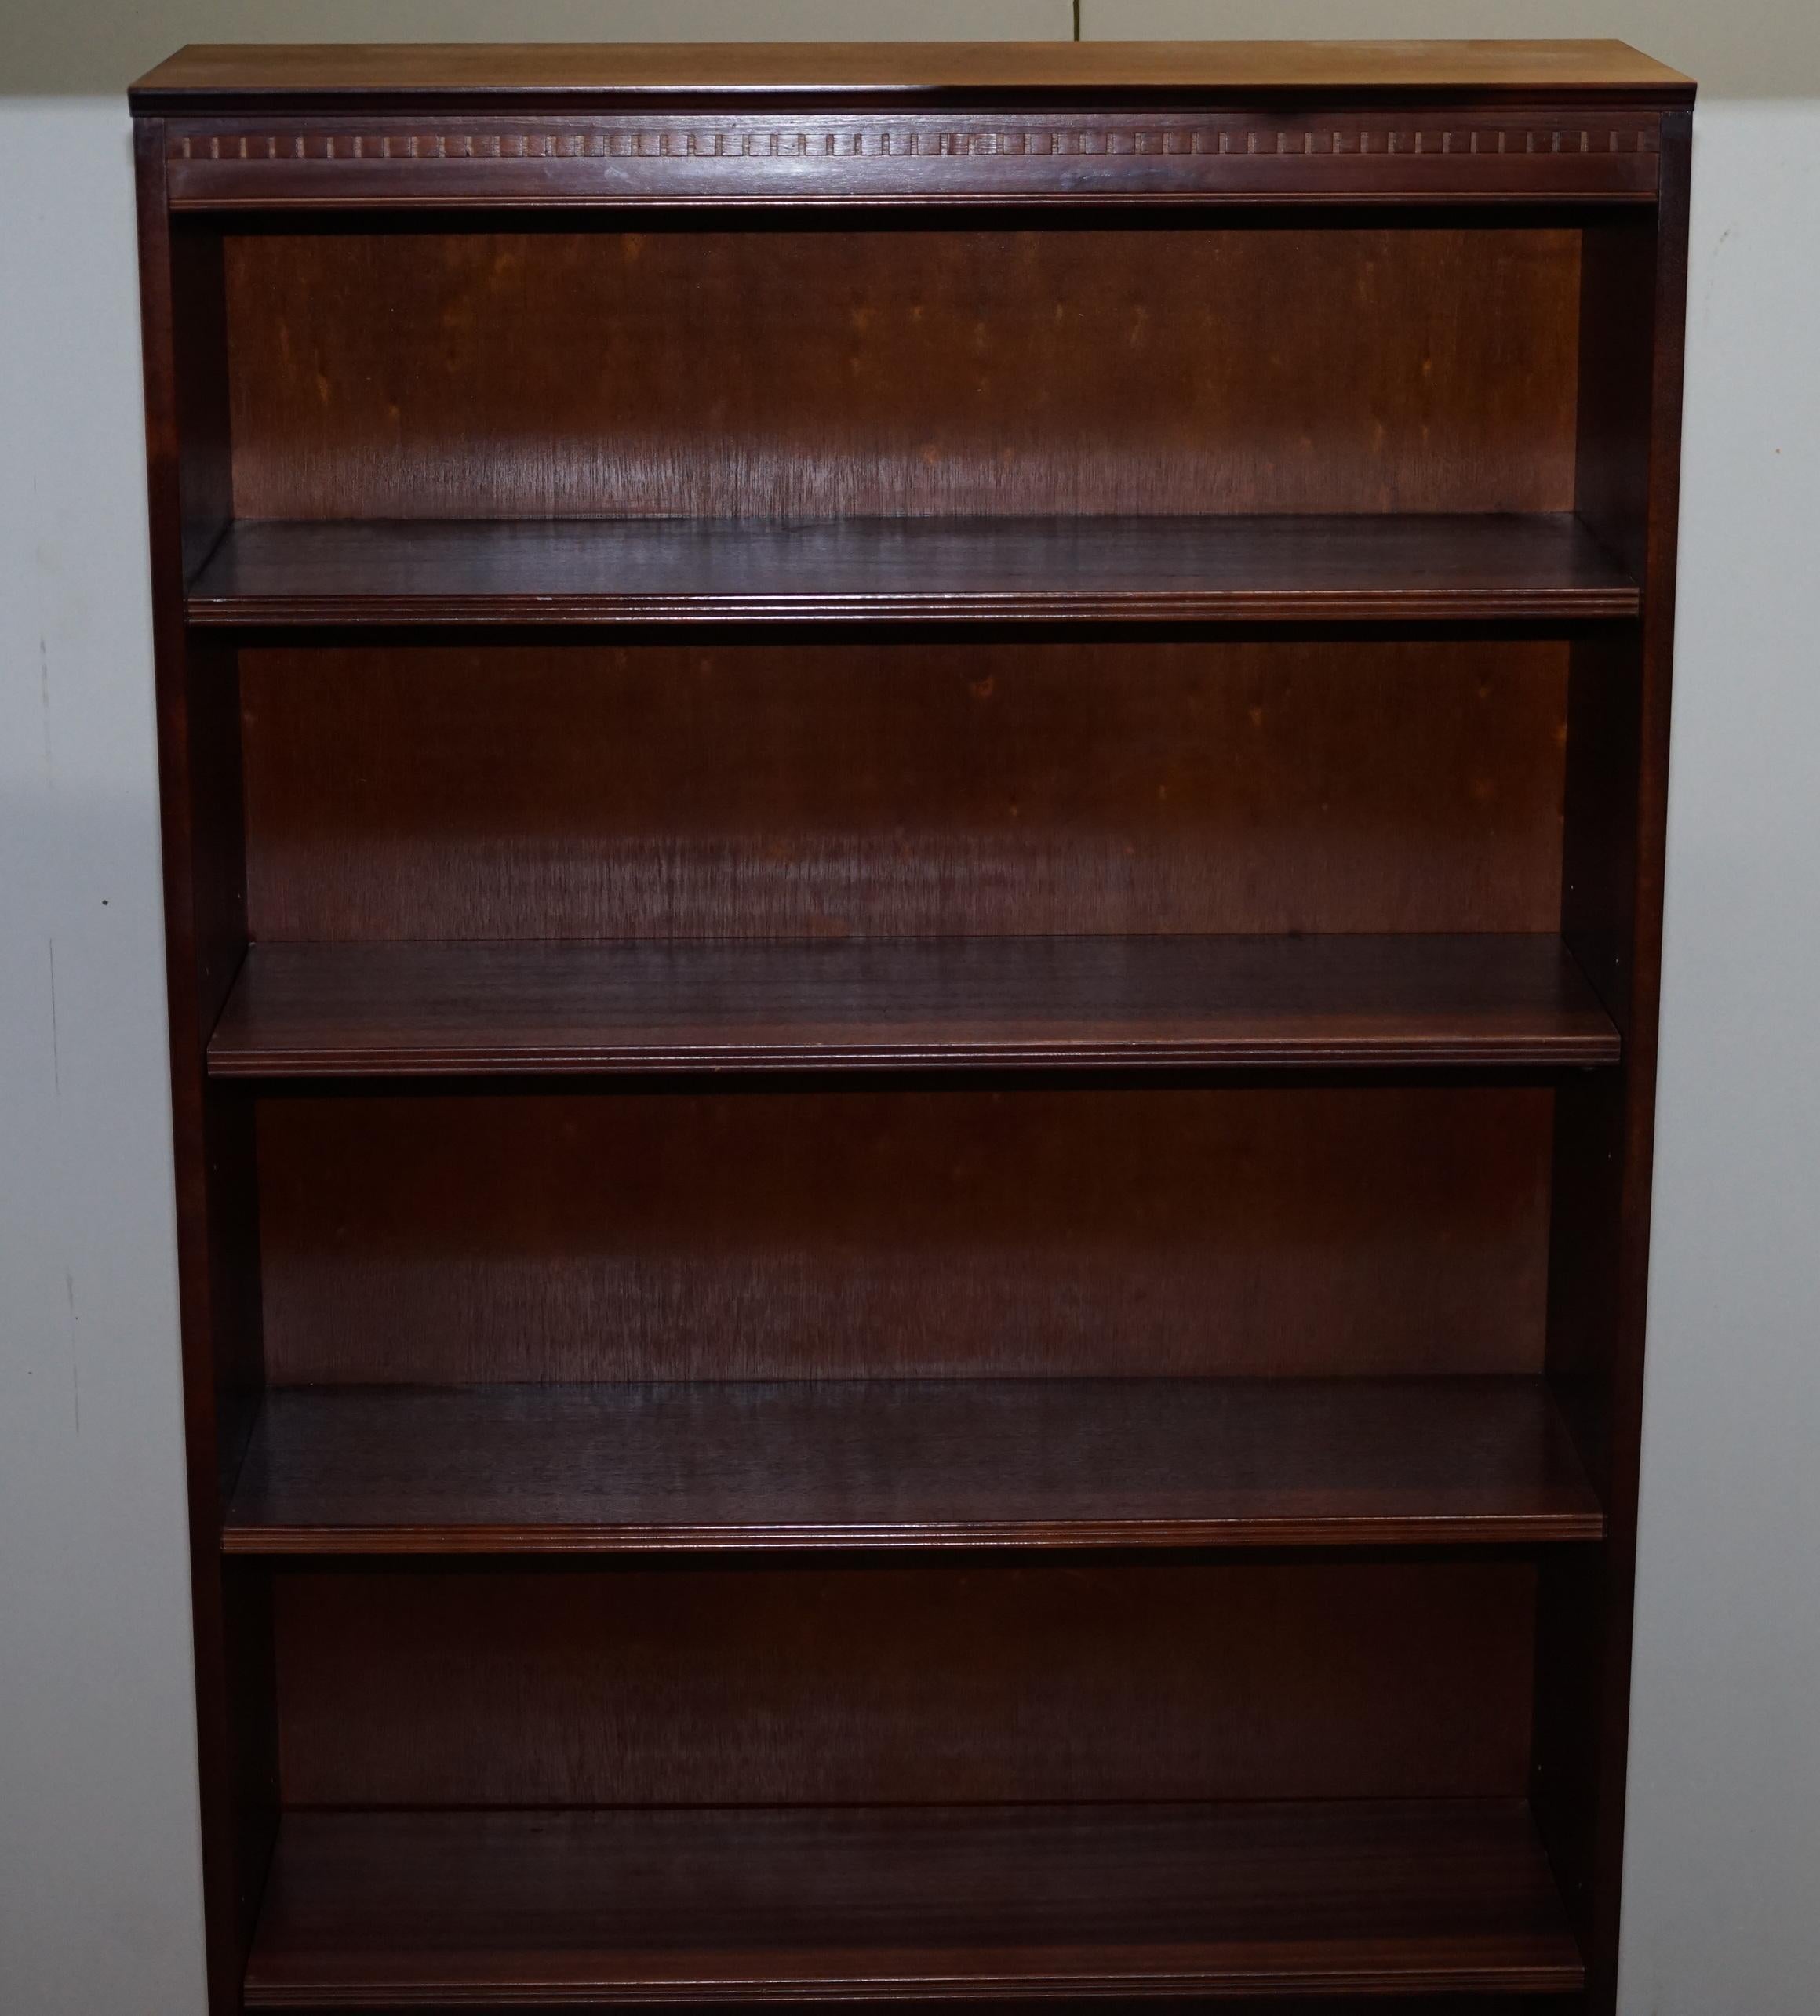 Other Bradley Furniture Mahogany English Library Bookcase Height Adjustable Shelves